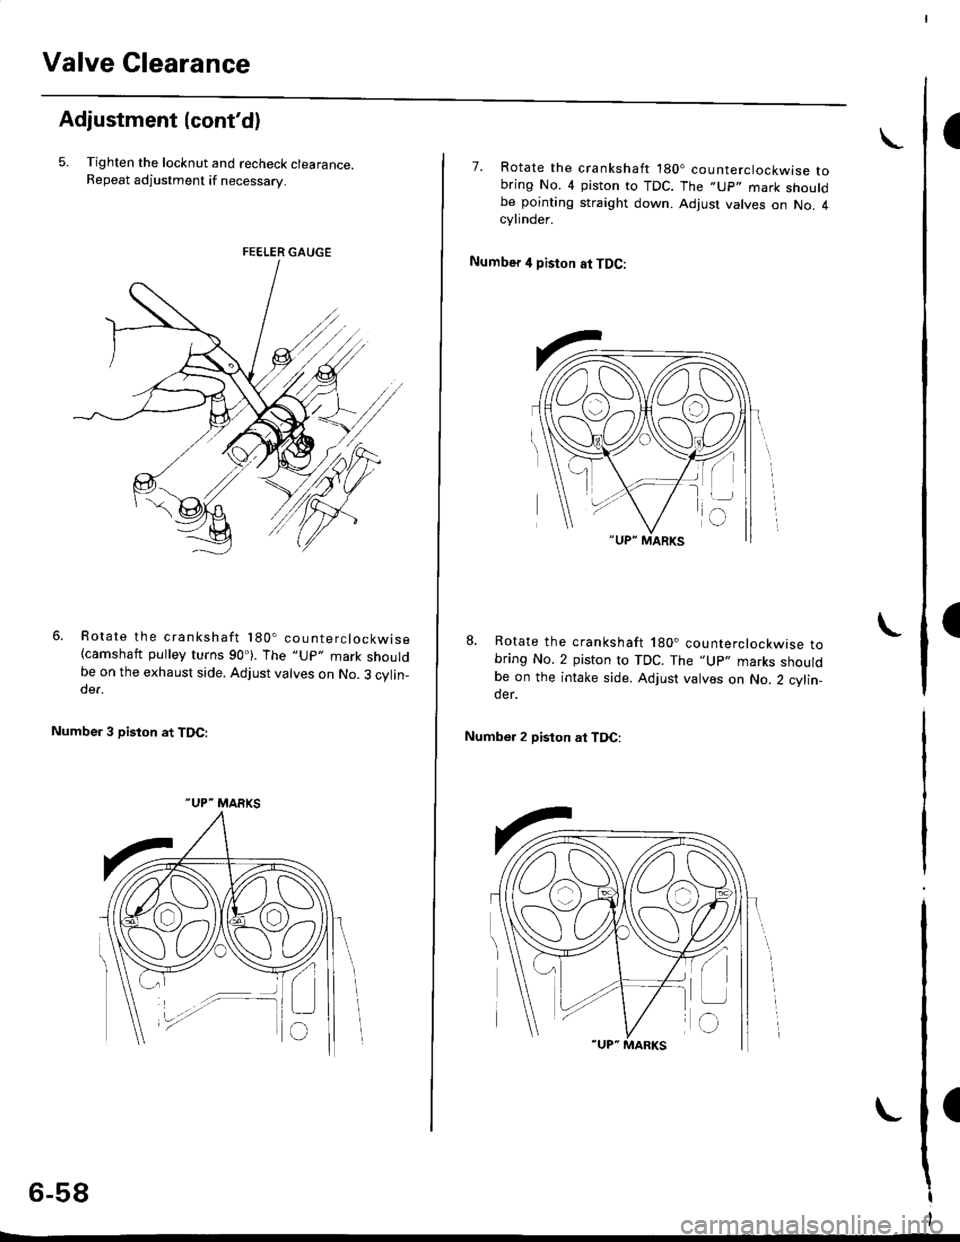 HONDA CIVIC 1998 6.G Workshop Manual Valve Clearance
I
I
I
Adjustment {contd)
5. Tighten the locknut and recheck clearance.Repeat adjustment if necessary.
Rotate the crankshaft 180. counterclockwise(camshaft pulley turns 90). The "Up" 